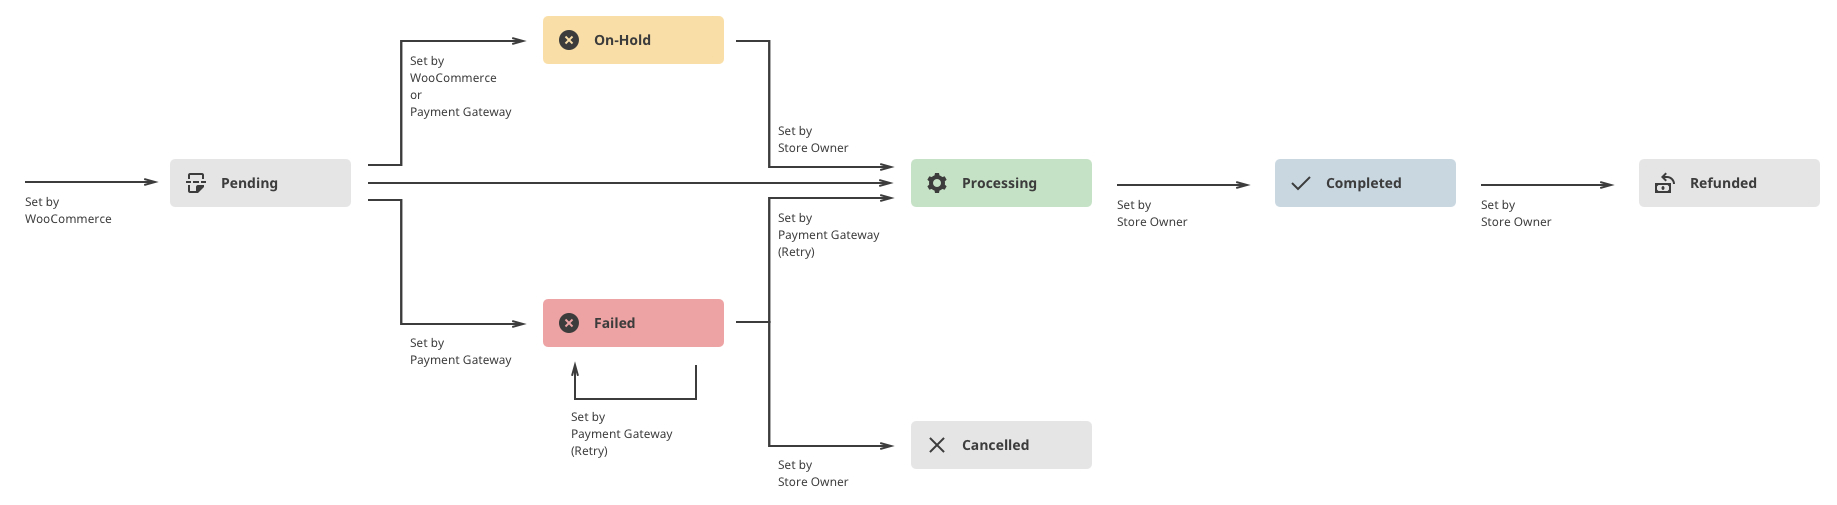 An illustration of how the order process works in WooCommerce.